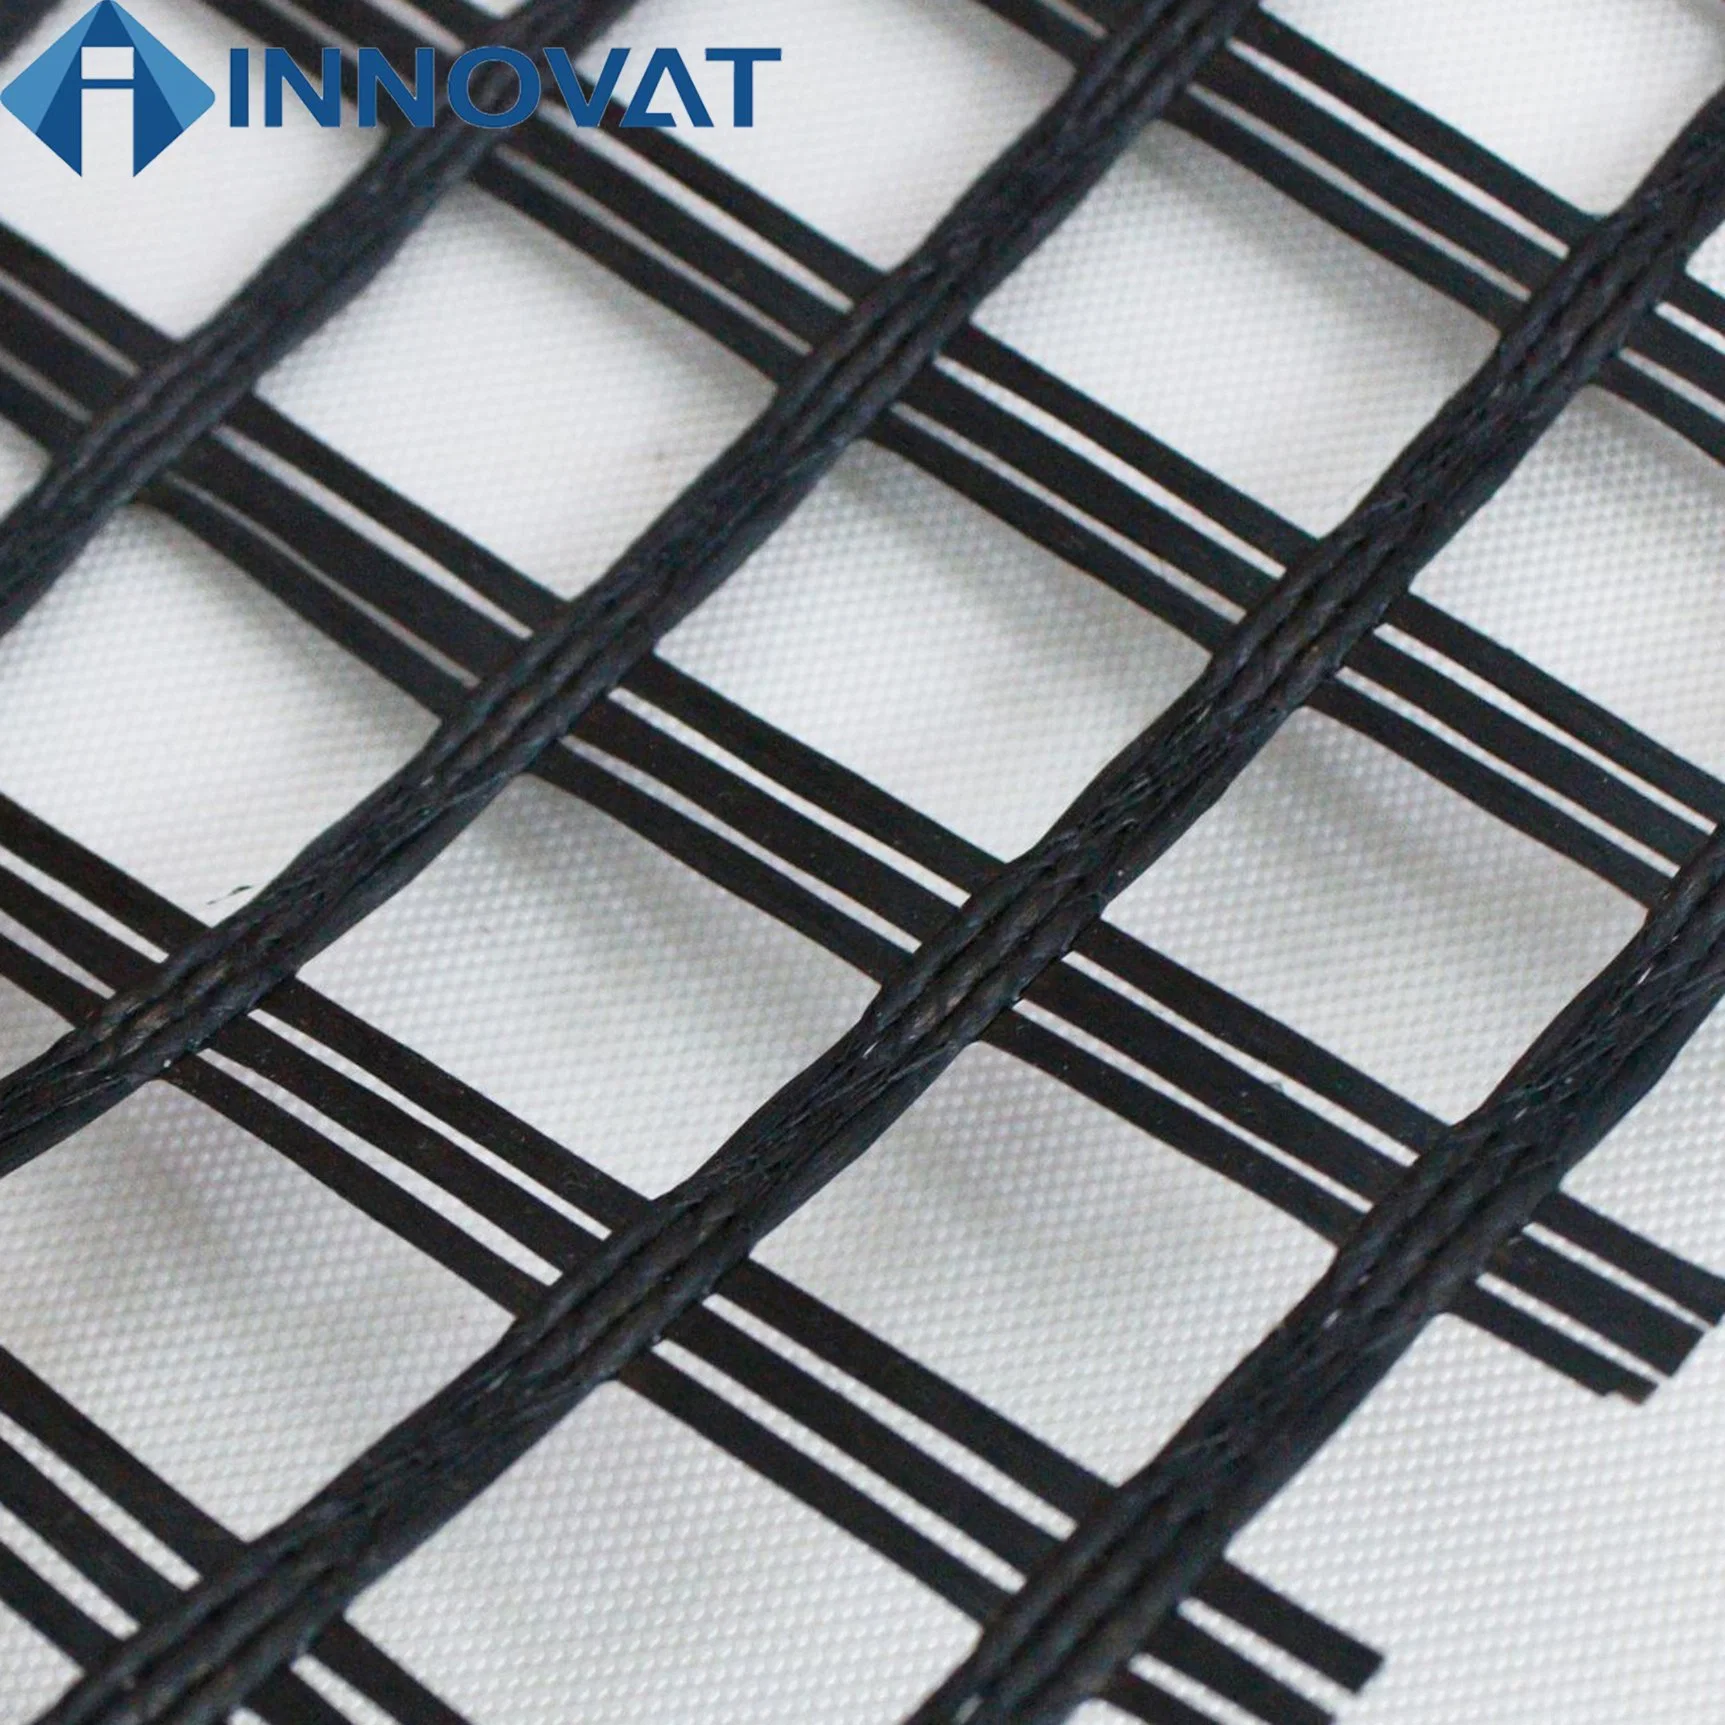 Fiberglass Geogrid Construction Material Road Surface